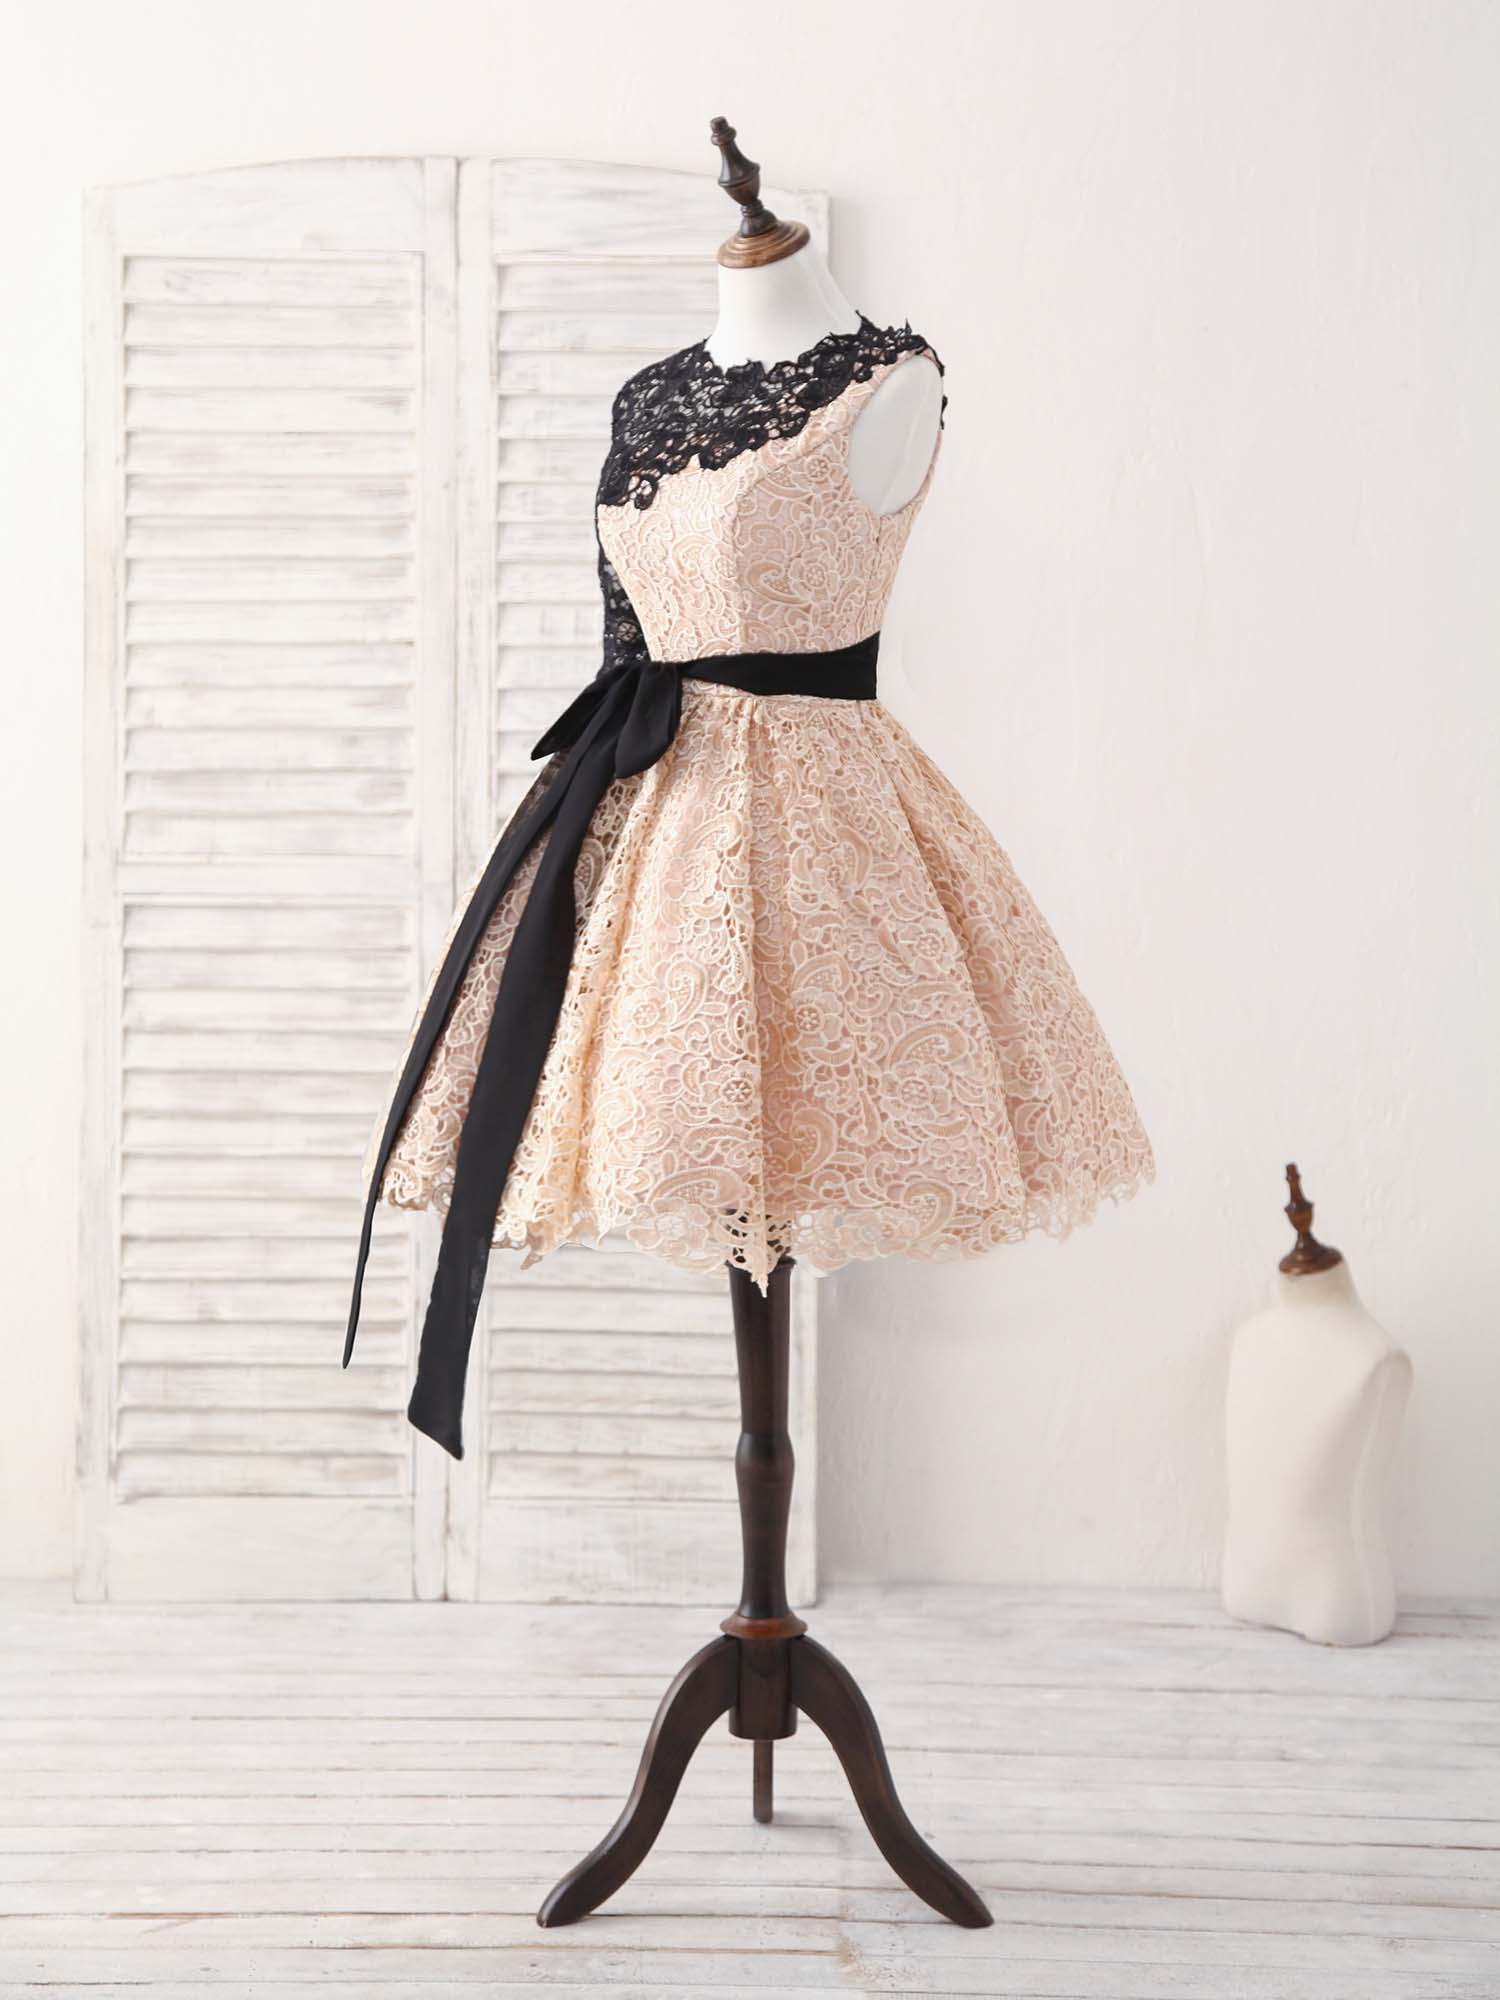 Lace Trim On A Too Short Dress · An Embellished Dress · Sewing on Cut Out +  Keep